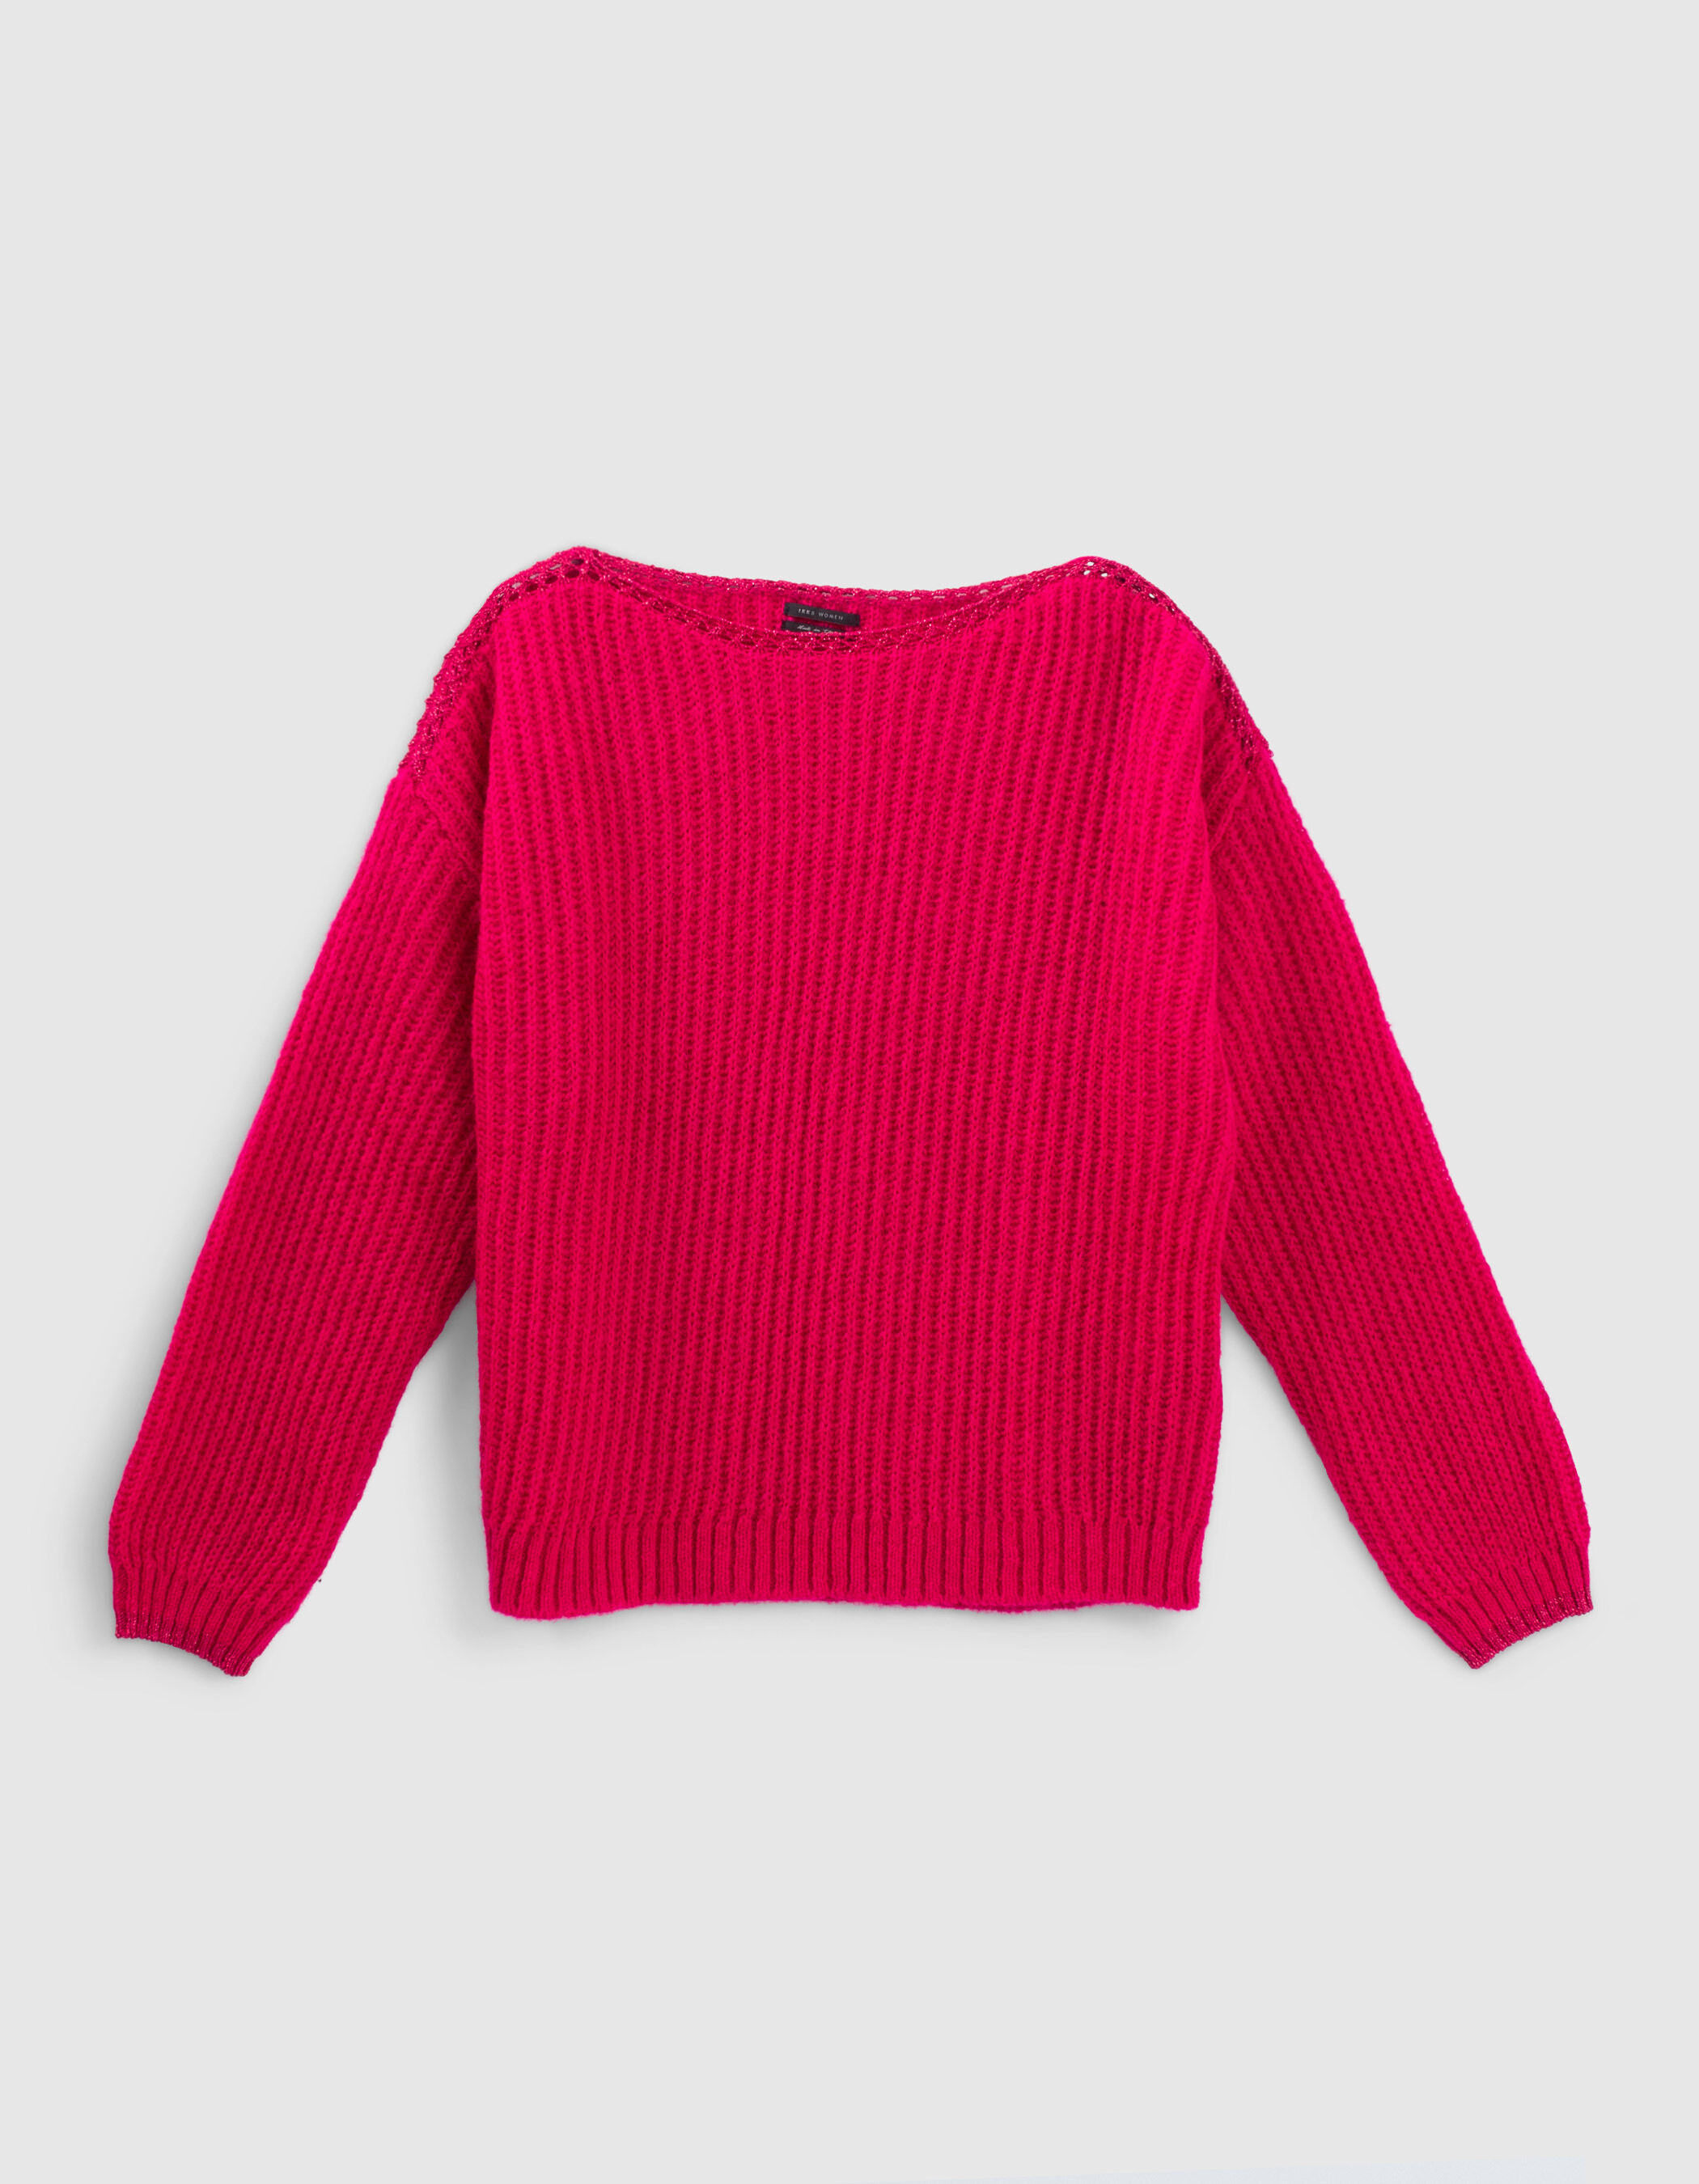 Women's pink ribbed knit sweater with lurex details